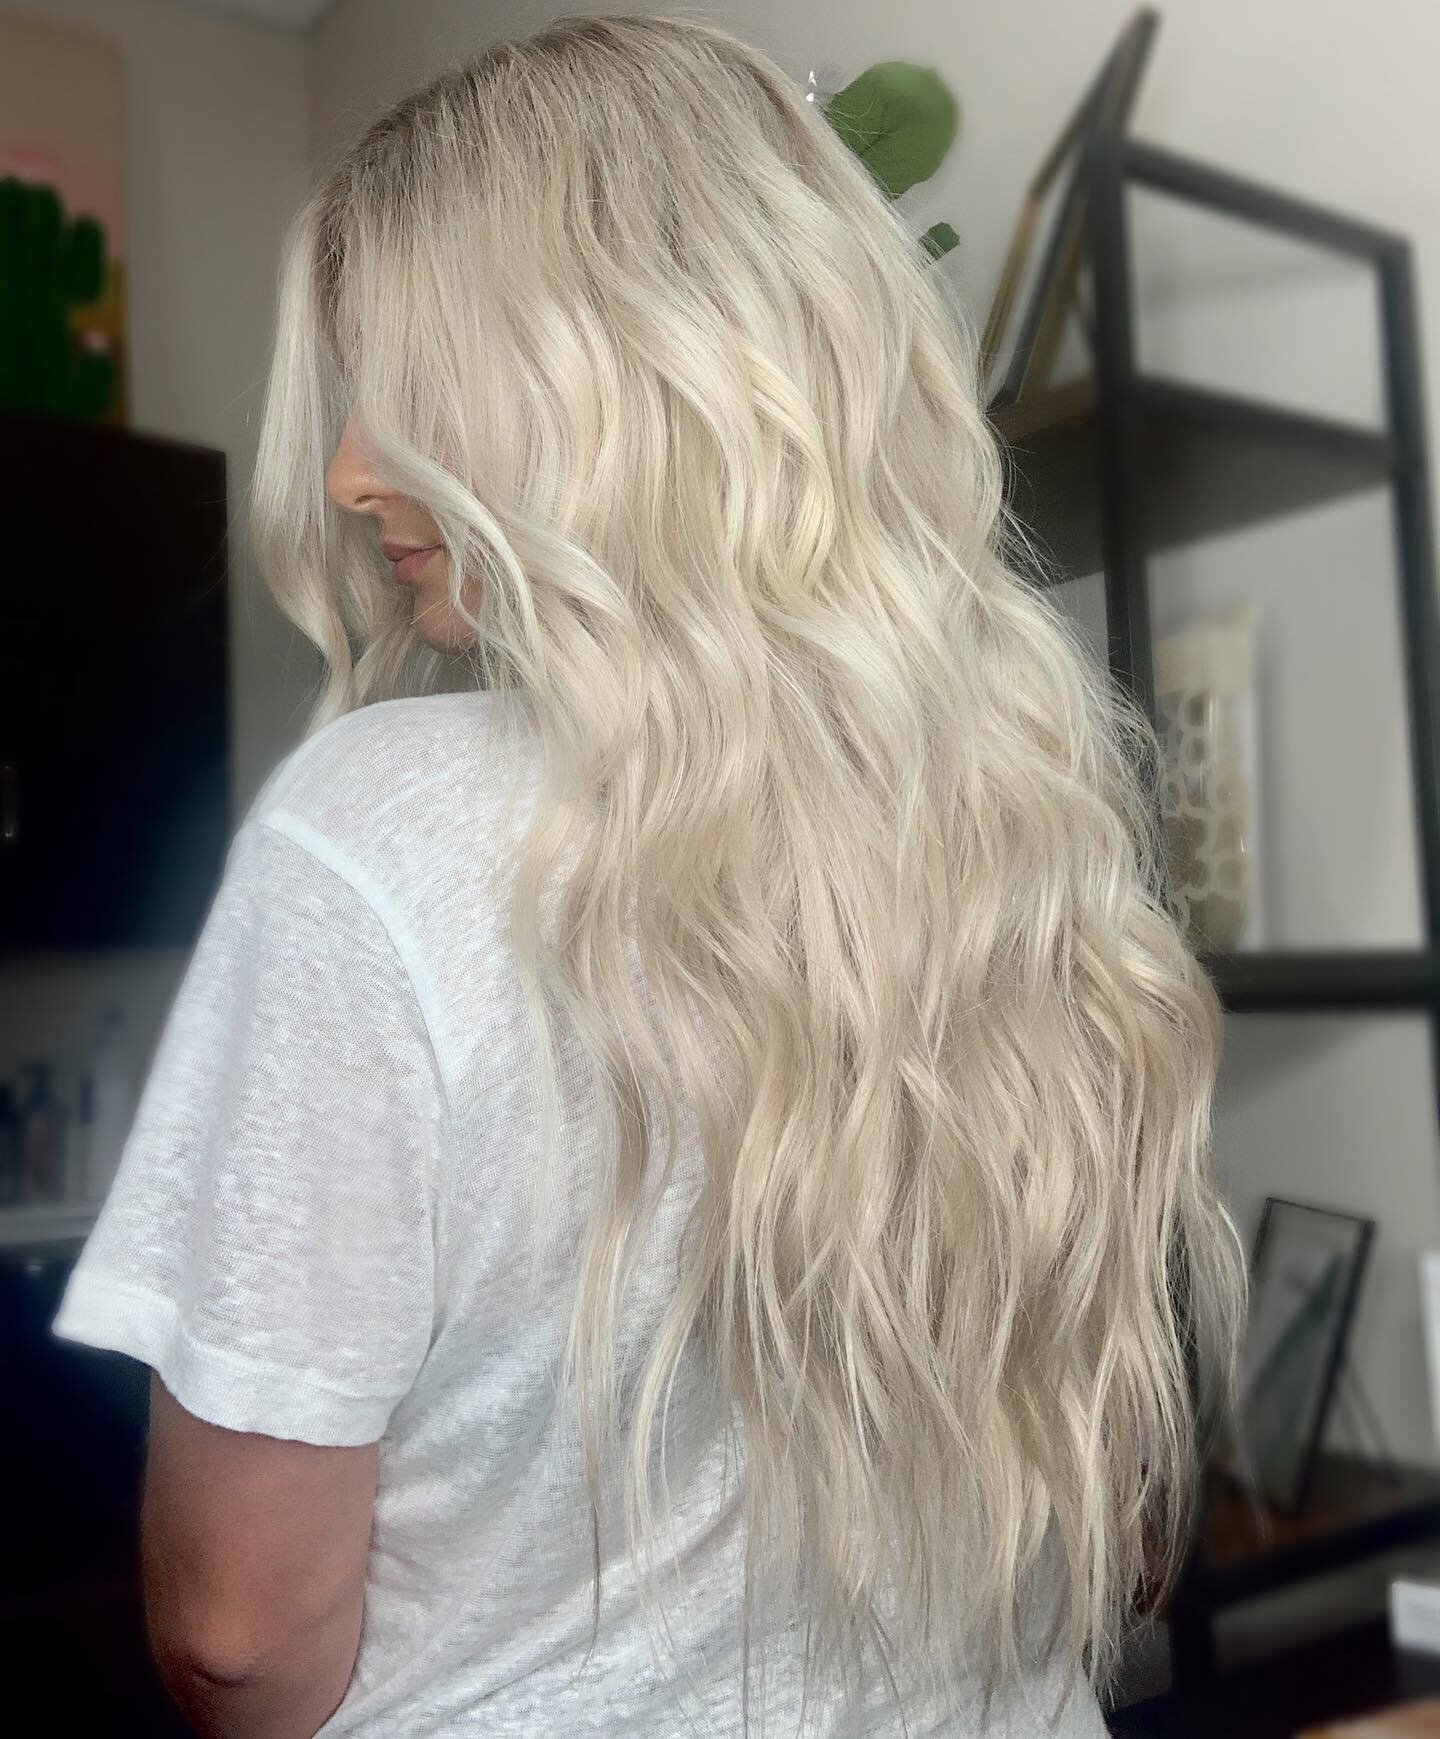 22&rdquo; inches of DREAM hair ✨
⠀⠀⠀⠀⠀⠀⠀⠀⠀
Are you ready to transform your hair? Just one row could be all you need to have the best hair of your life! 💗
⠀⠀⠀⠀⠀⠀⠀⠀⠀
I have spots for consultations in September and the next installation appointment is 